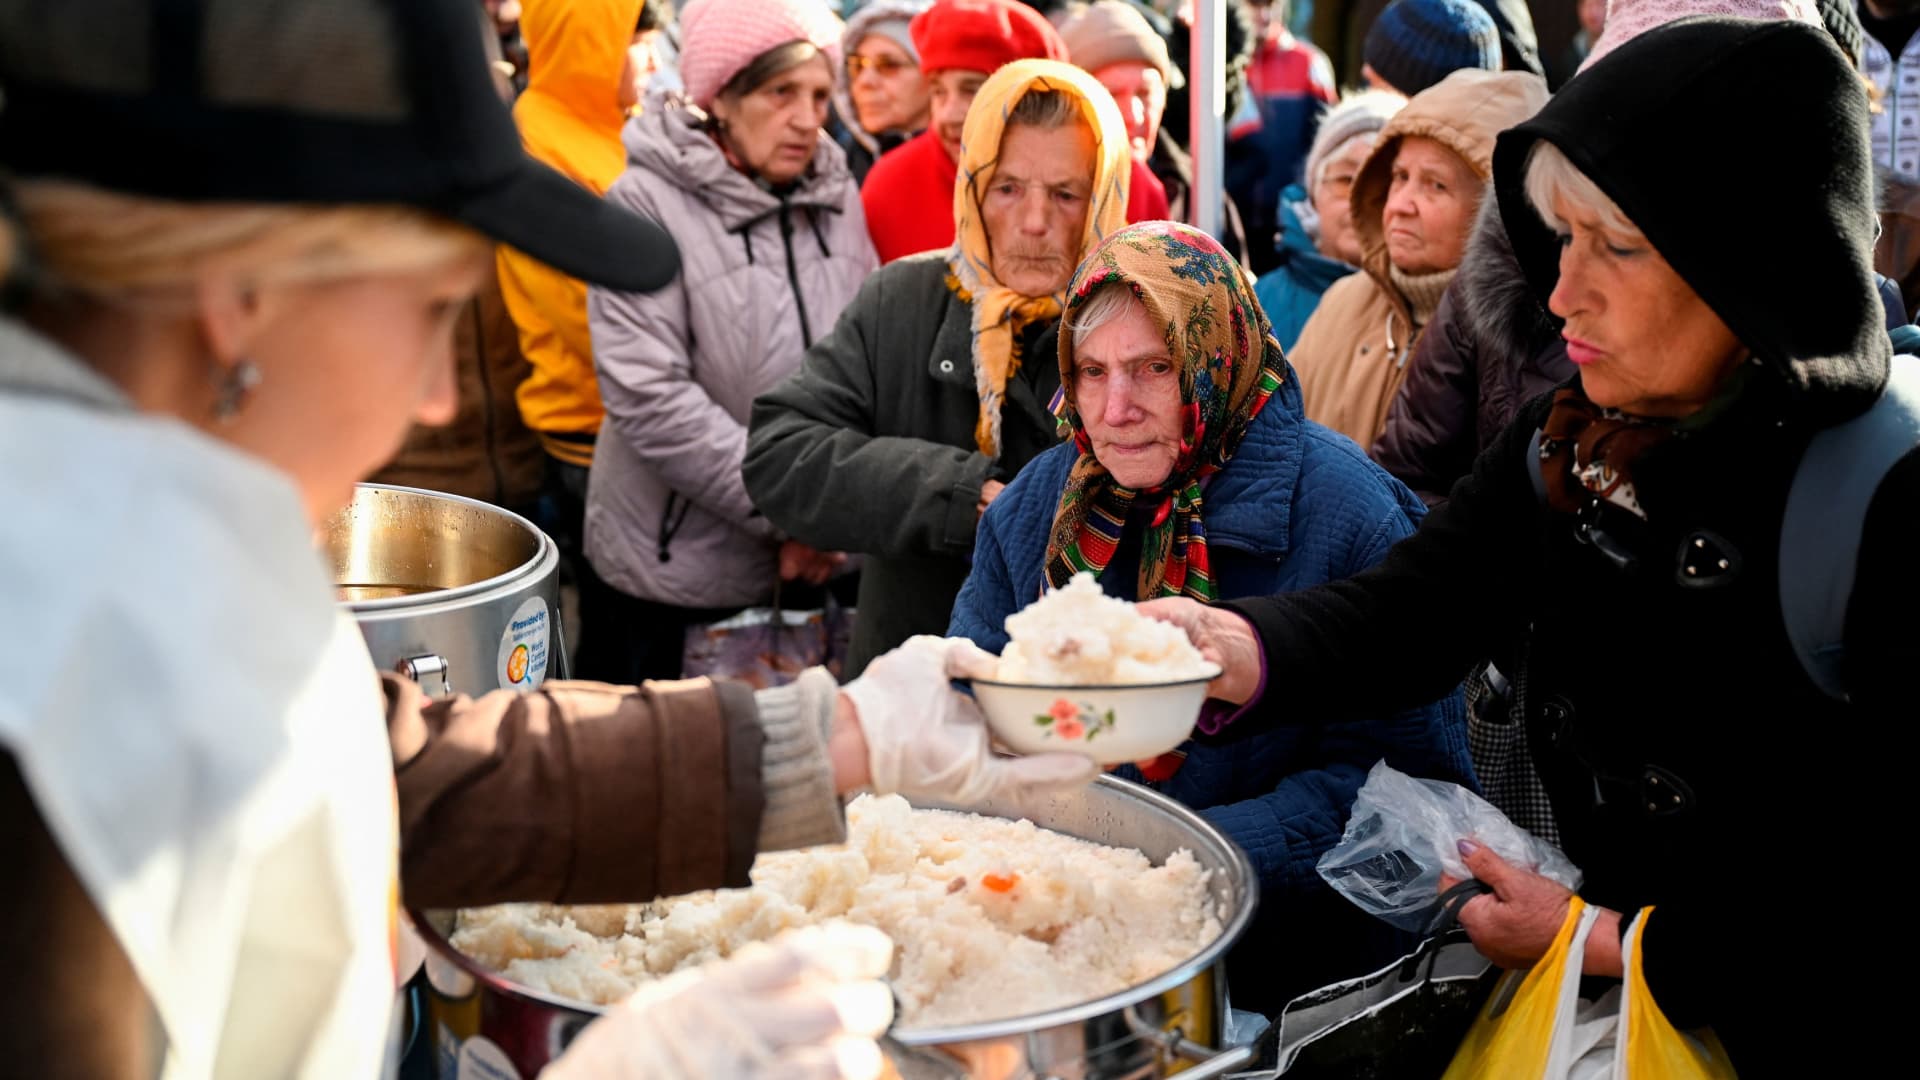 Local residents line up to receive a meal provided by the World Central Kitchen NGO, amid Russia's invasion of Ukraine, in the town of Kupiansk in Kharkiv region, Ukraine October 14, 2022.